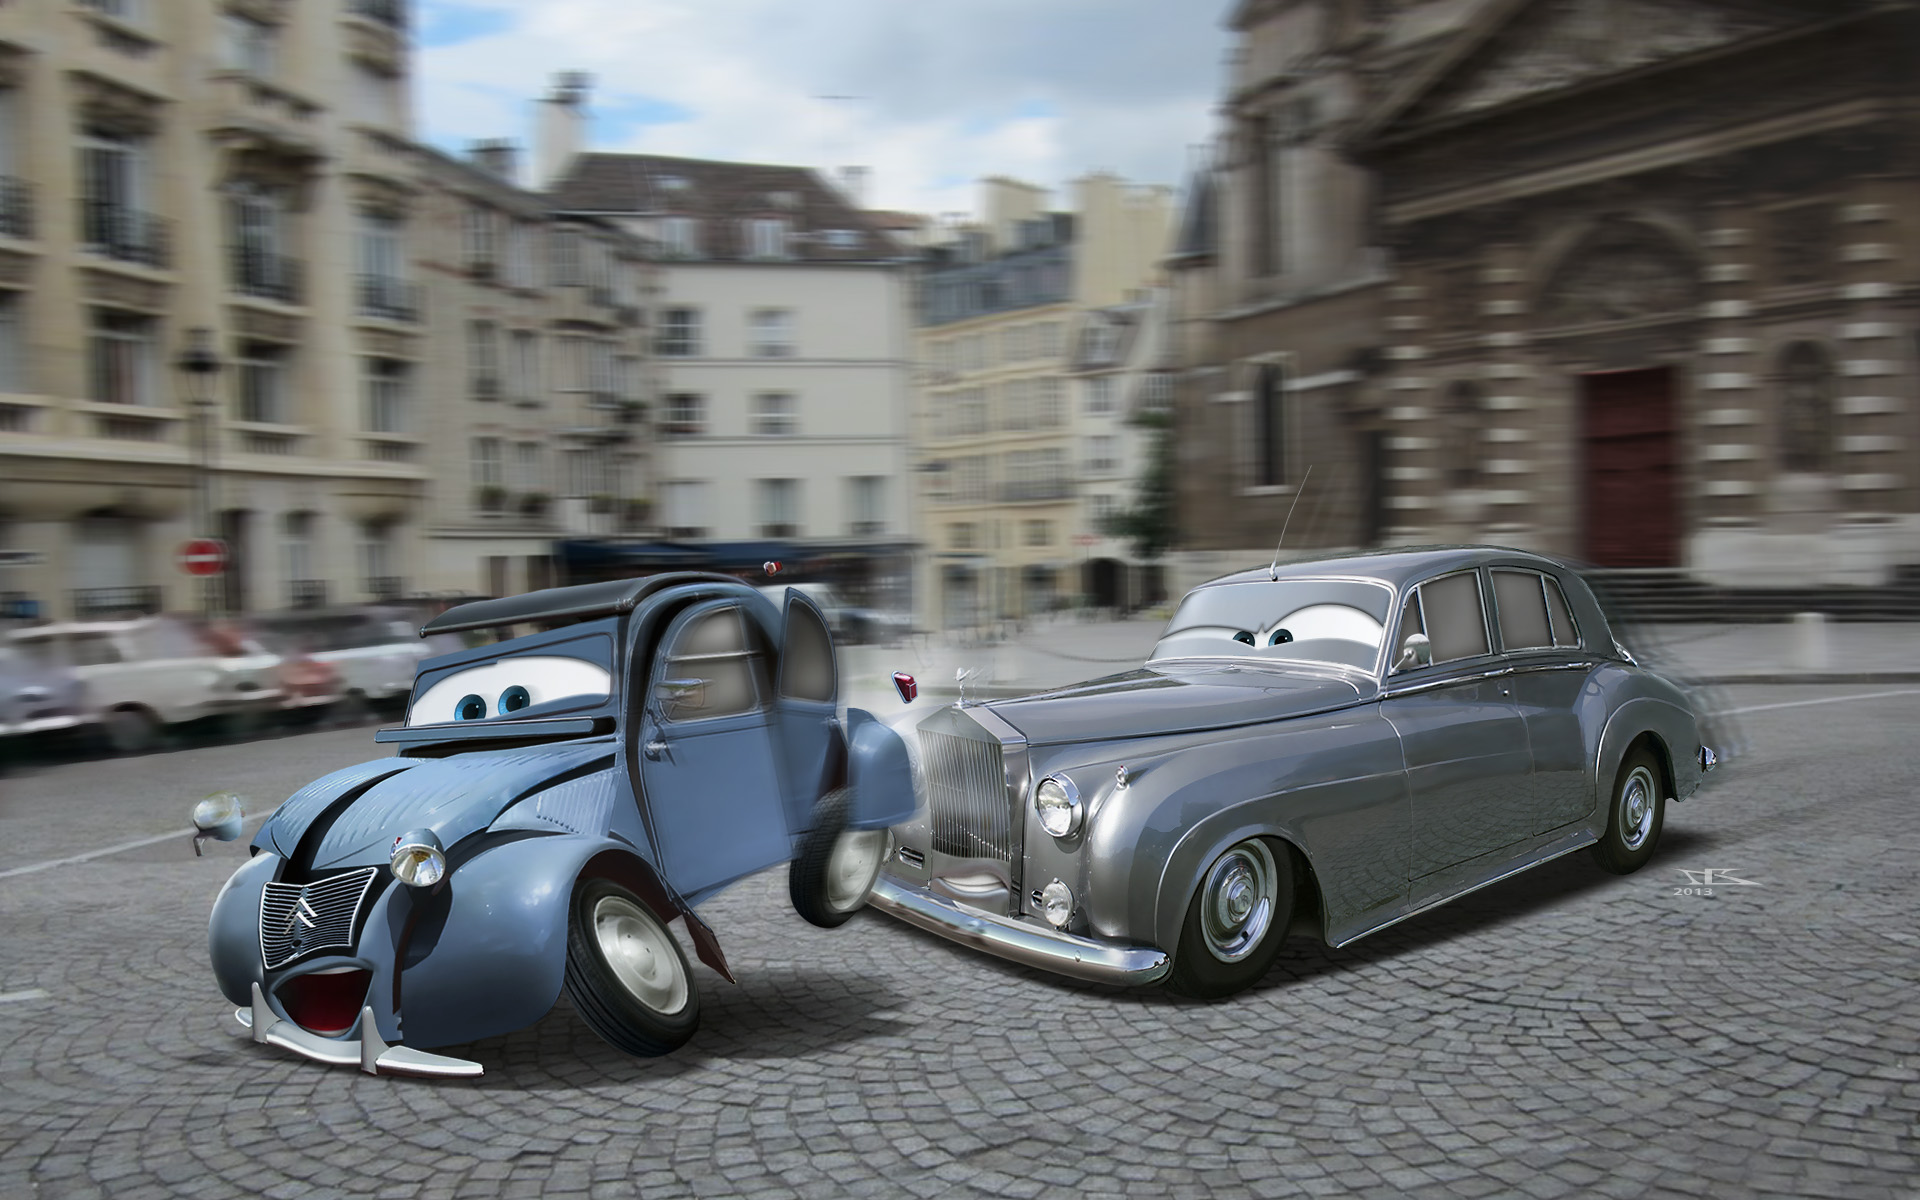 Wallpapers Cartoons Cars 1 and 2 Le Corniaud